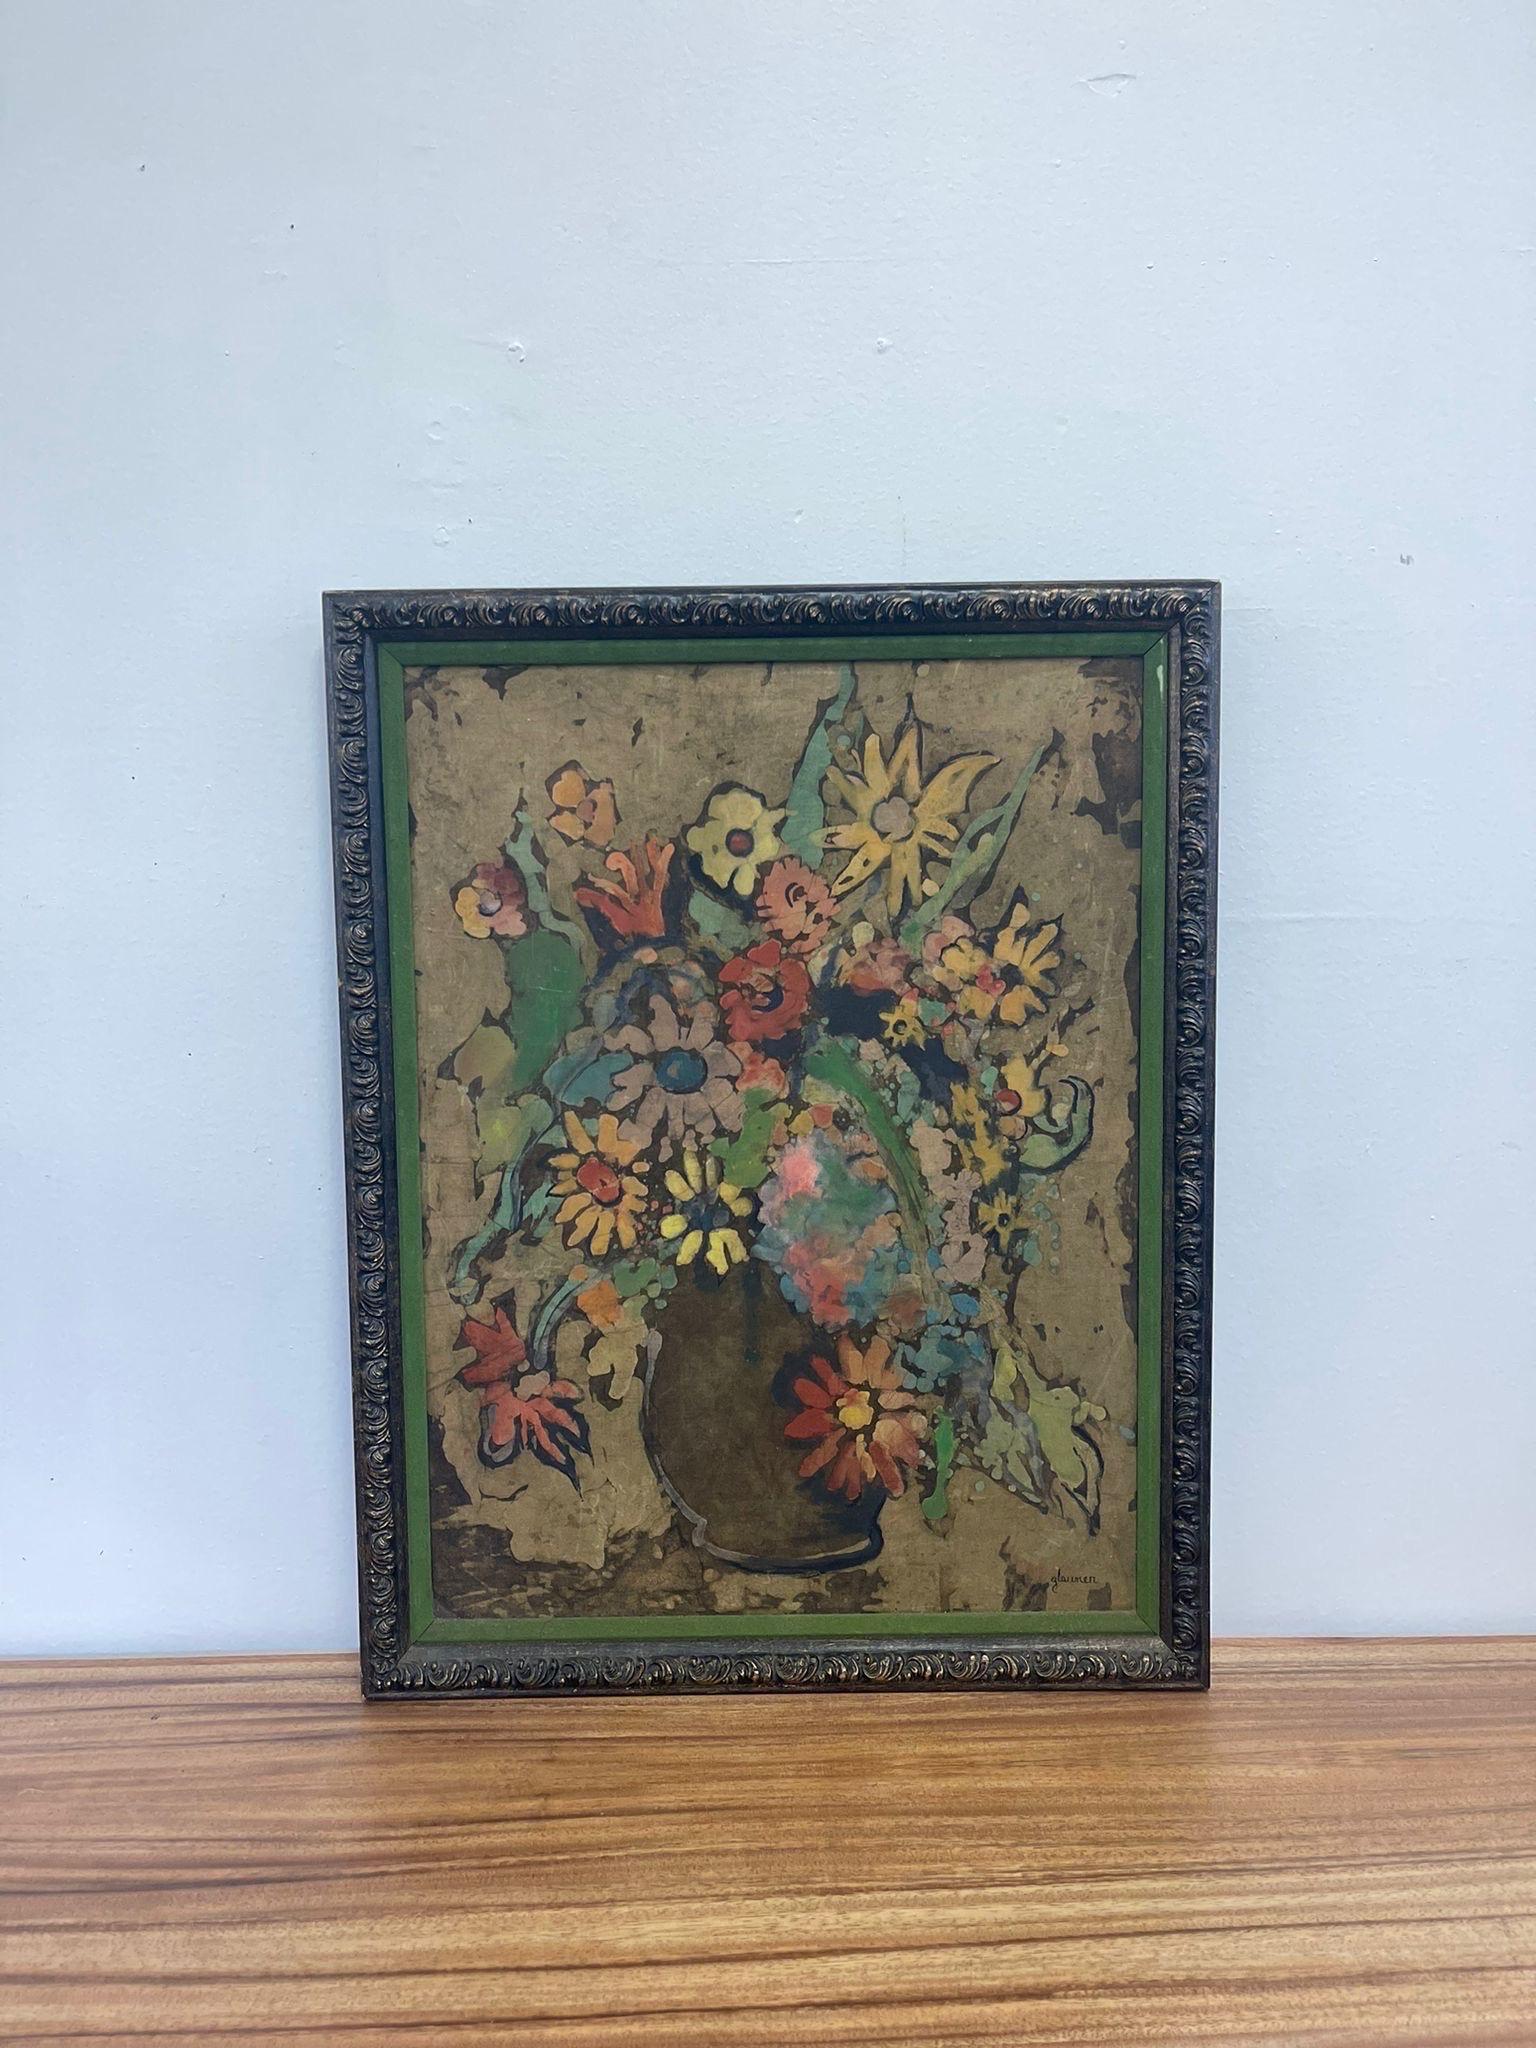 Beautiful Antique Style Painting of Flowers in a Vase. Green Velvet lining on the Frame. Vintage Condition Consistent with Age as Pictured.

Dimensions. 21 W ; 3/4 D ; 26 1/2 H